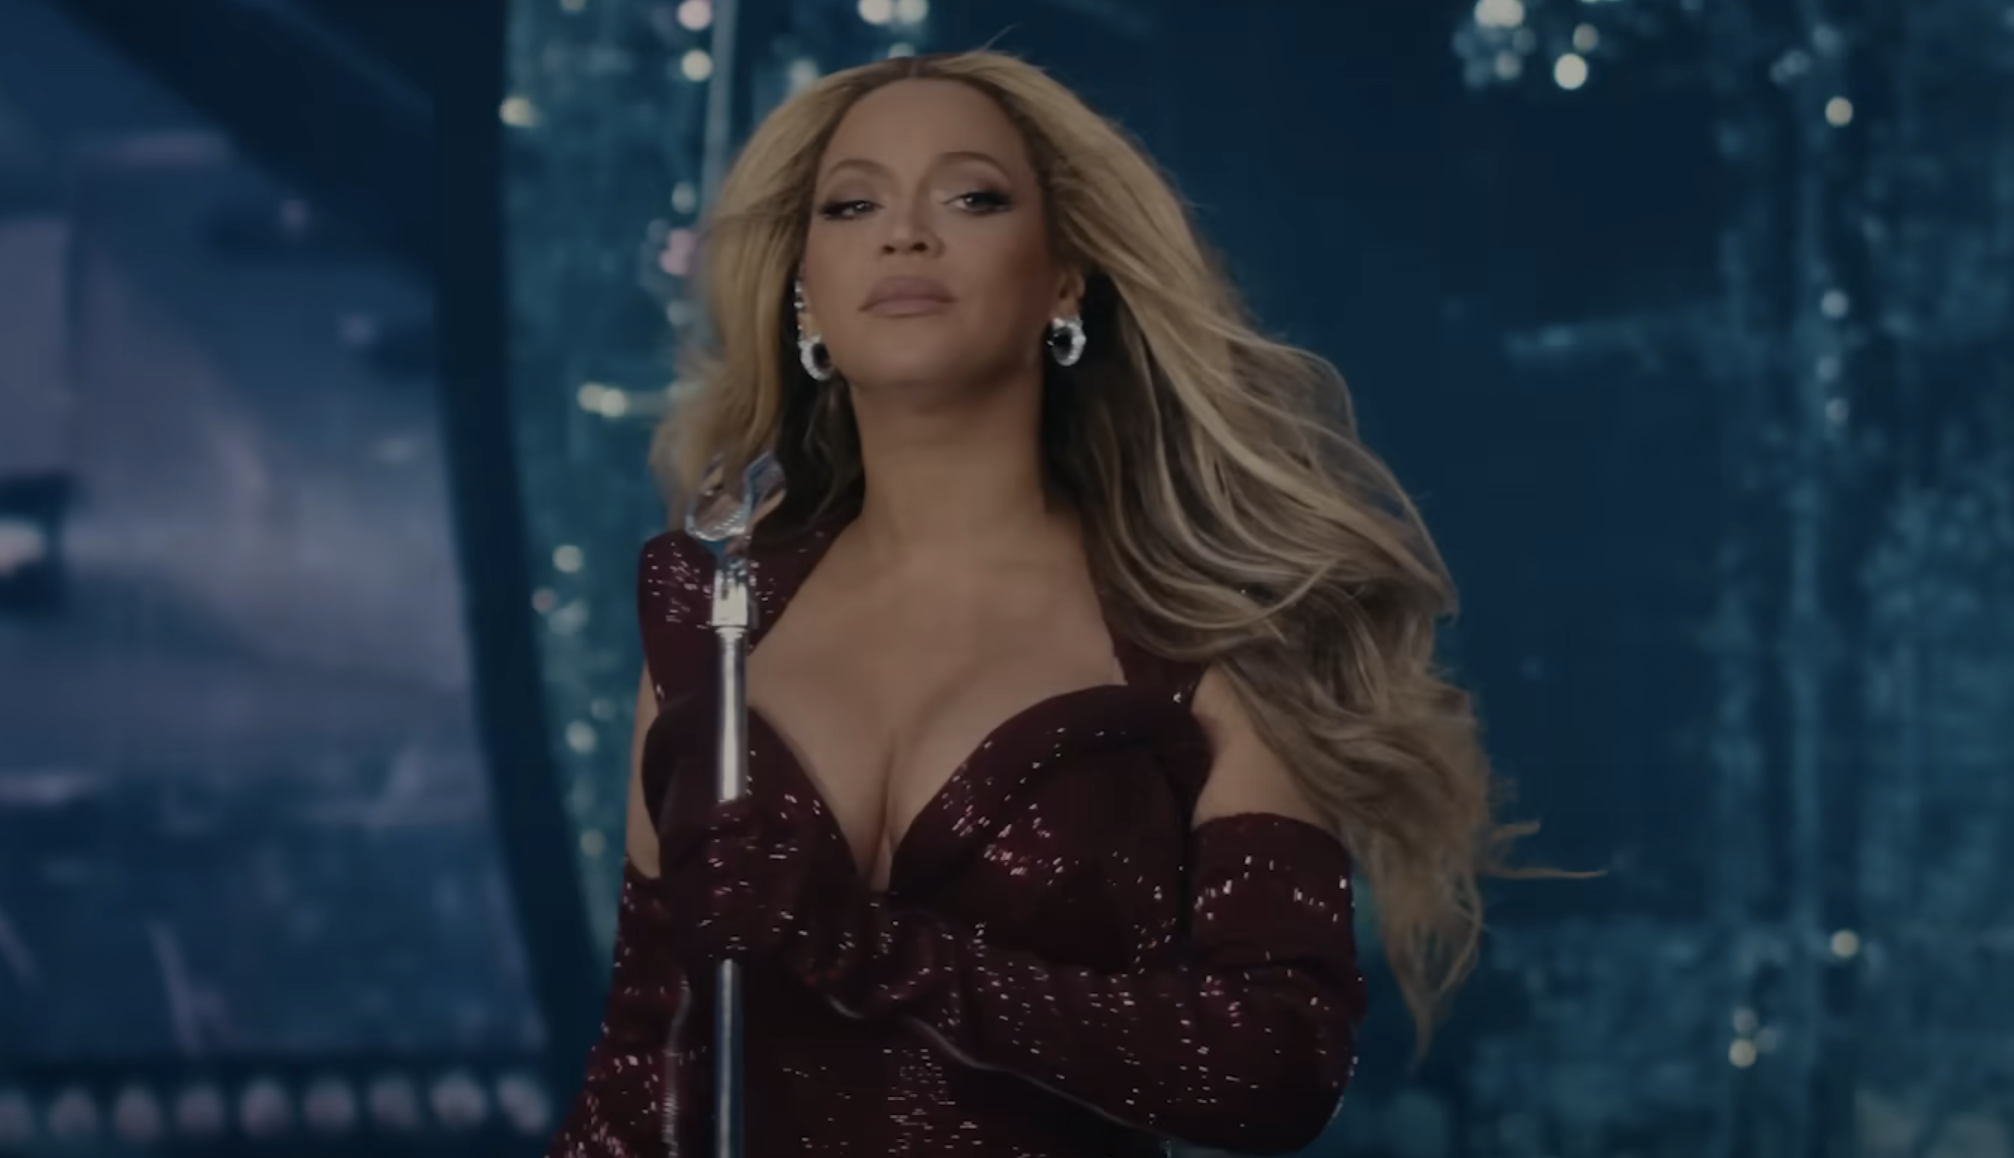 Beyoncé performs on stage, wearing a shimmering dress with matching gloves, holding a microphone